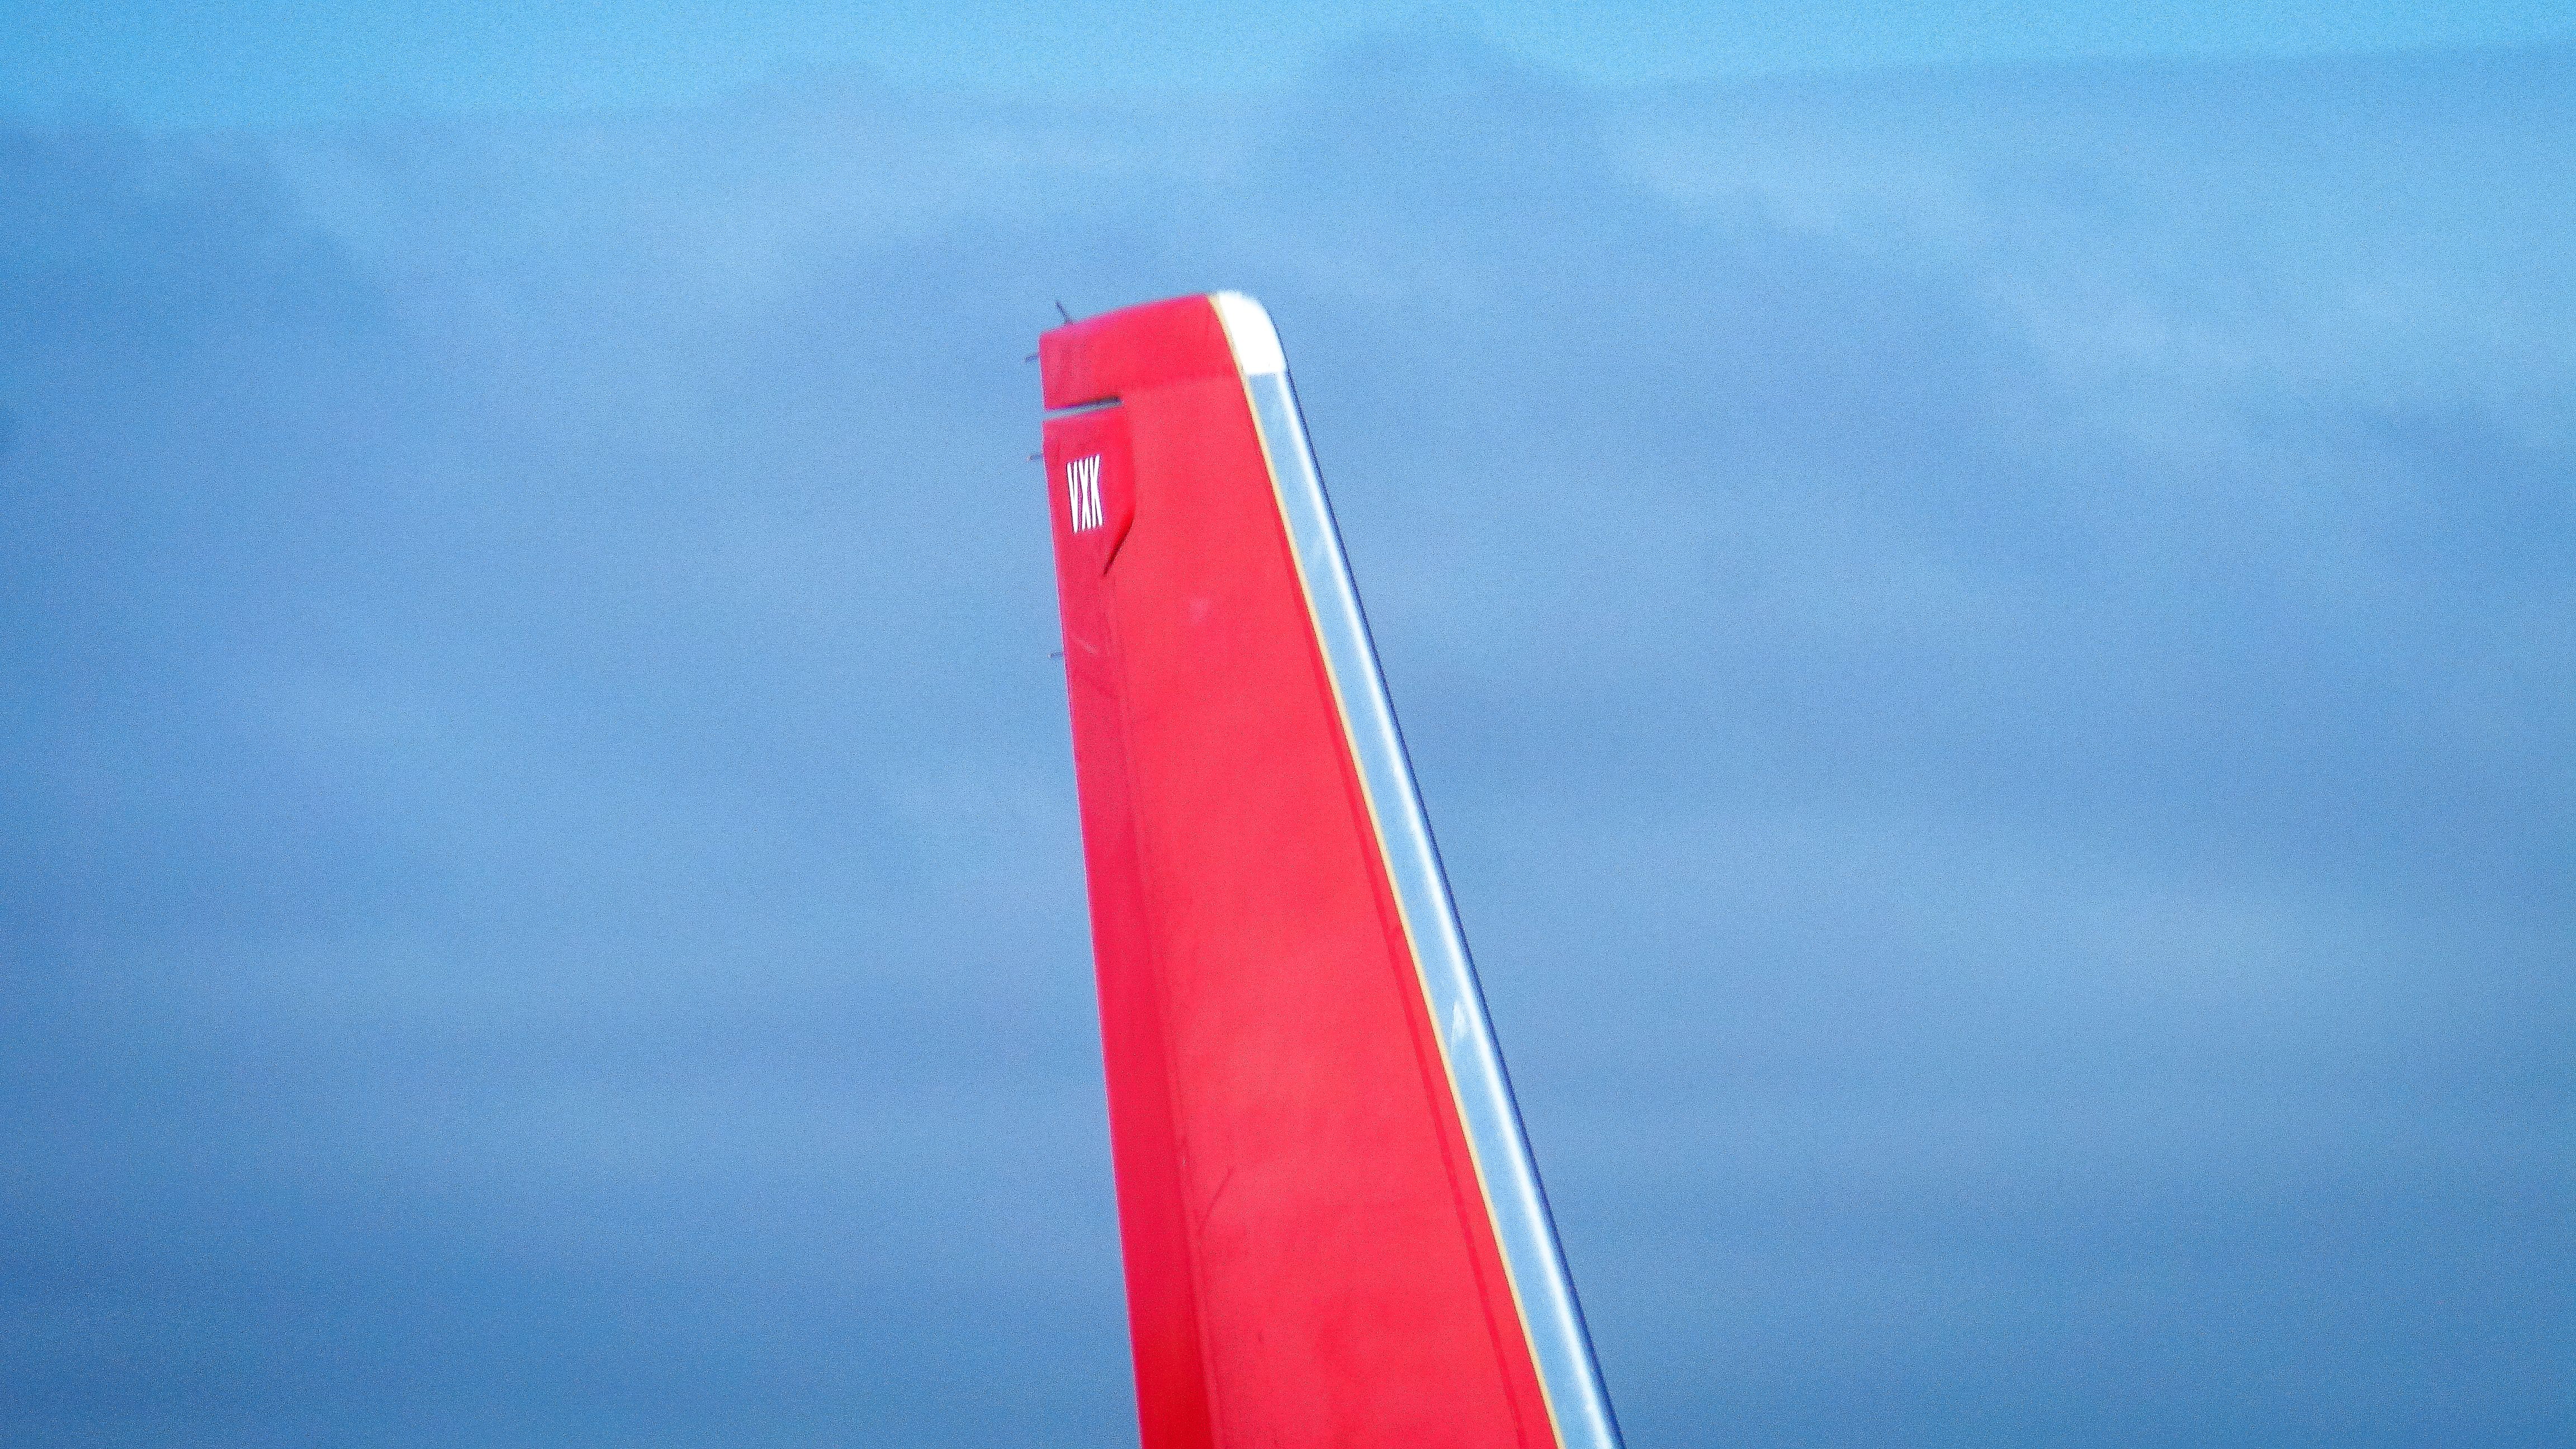 Wallpaper, blue, red, sky, clouds, plane, airplane, airport, Samsung, aeroplane, Adelaide, thin, dorsal, fin, tailfin, sensors, Slit, theen 4608x2592